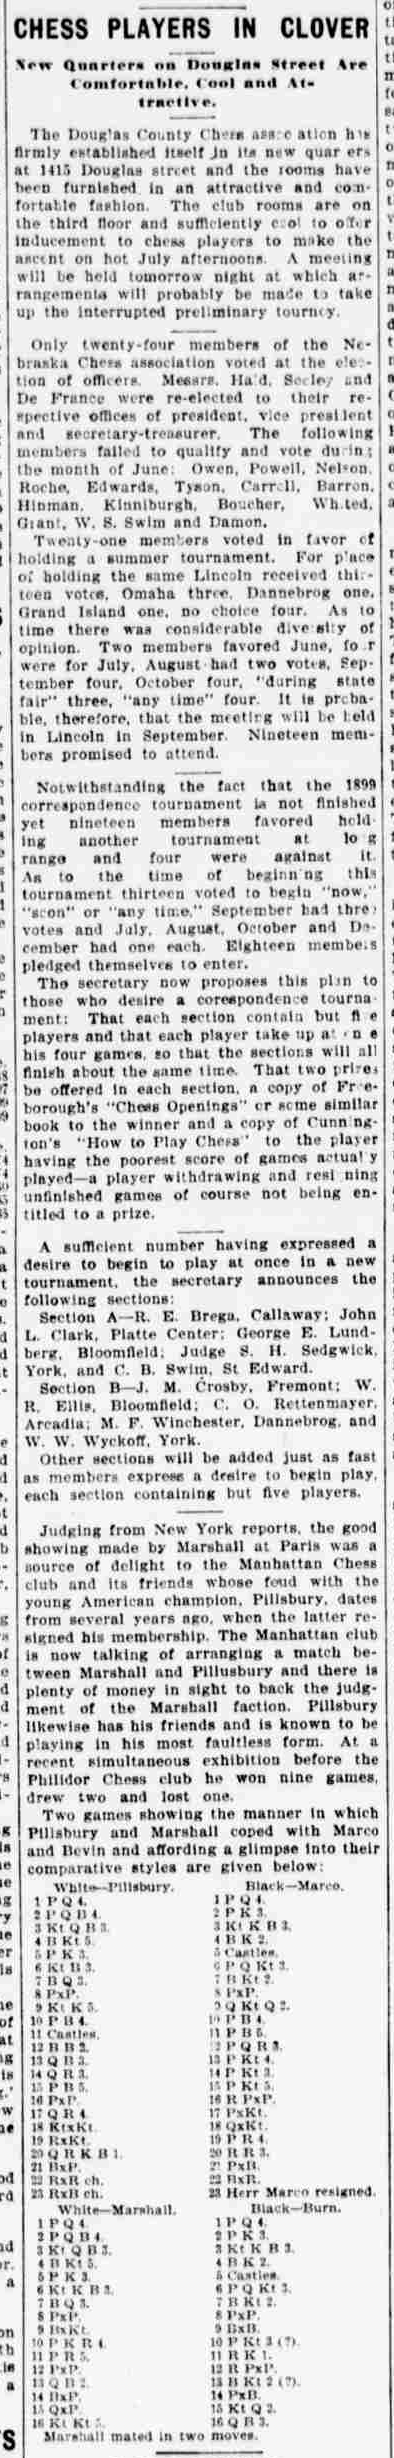 1900.07.08-01 Omaha Daily Bee.png